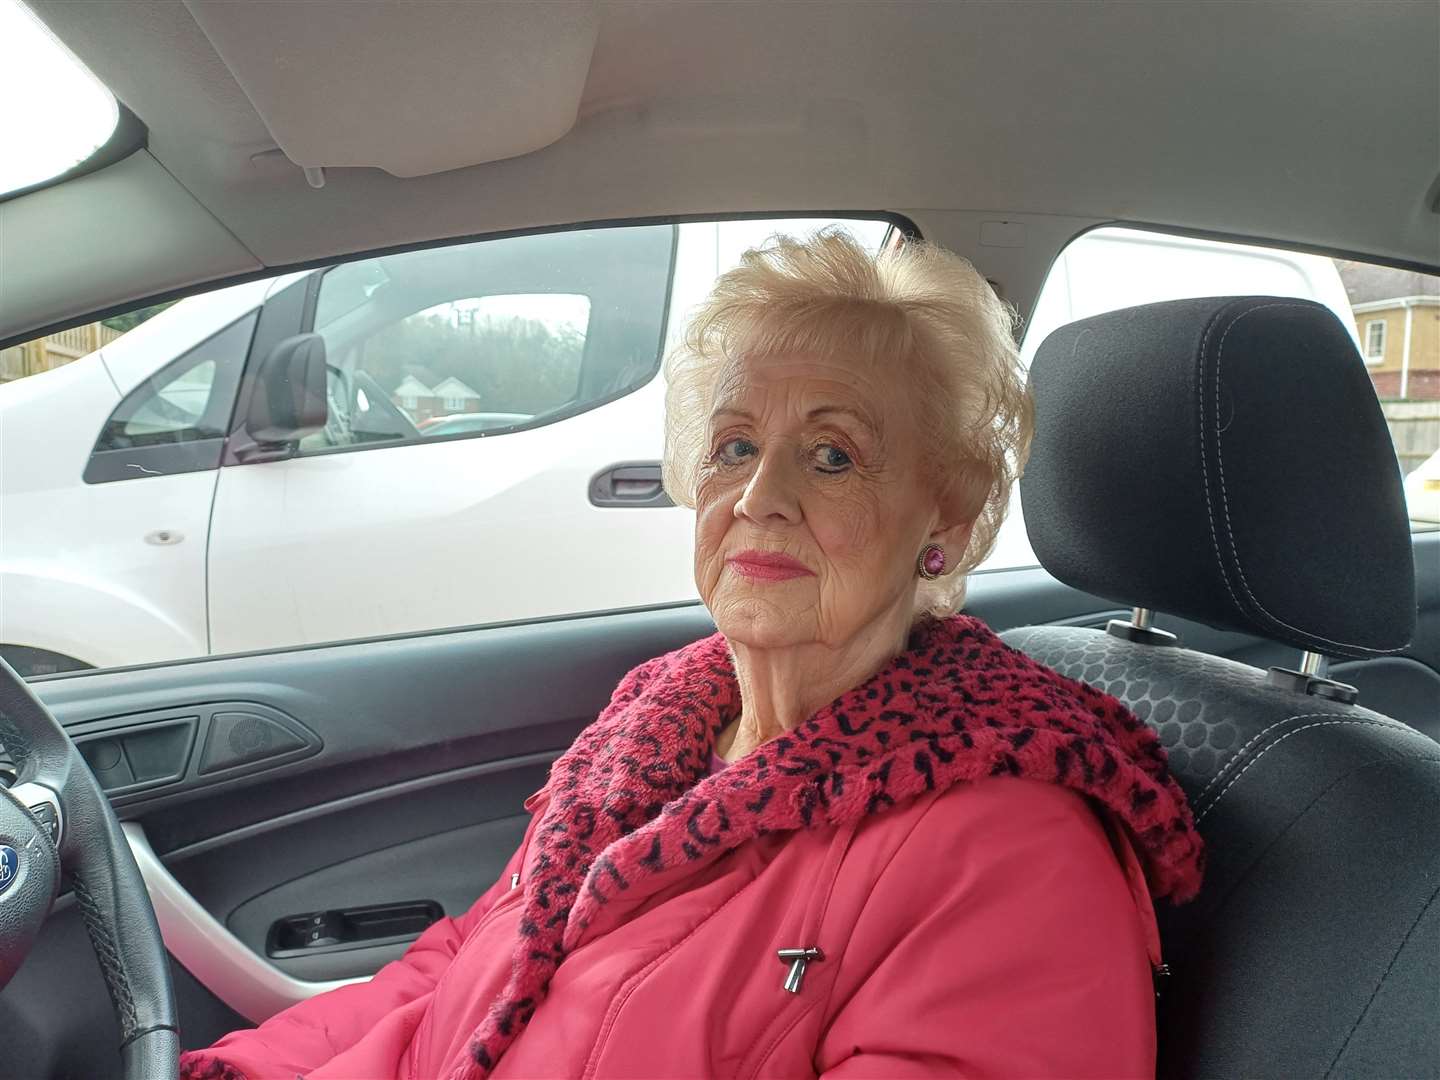 The 83-year-old uses the car park every Thursday to get her hair done